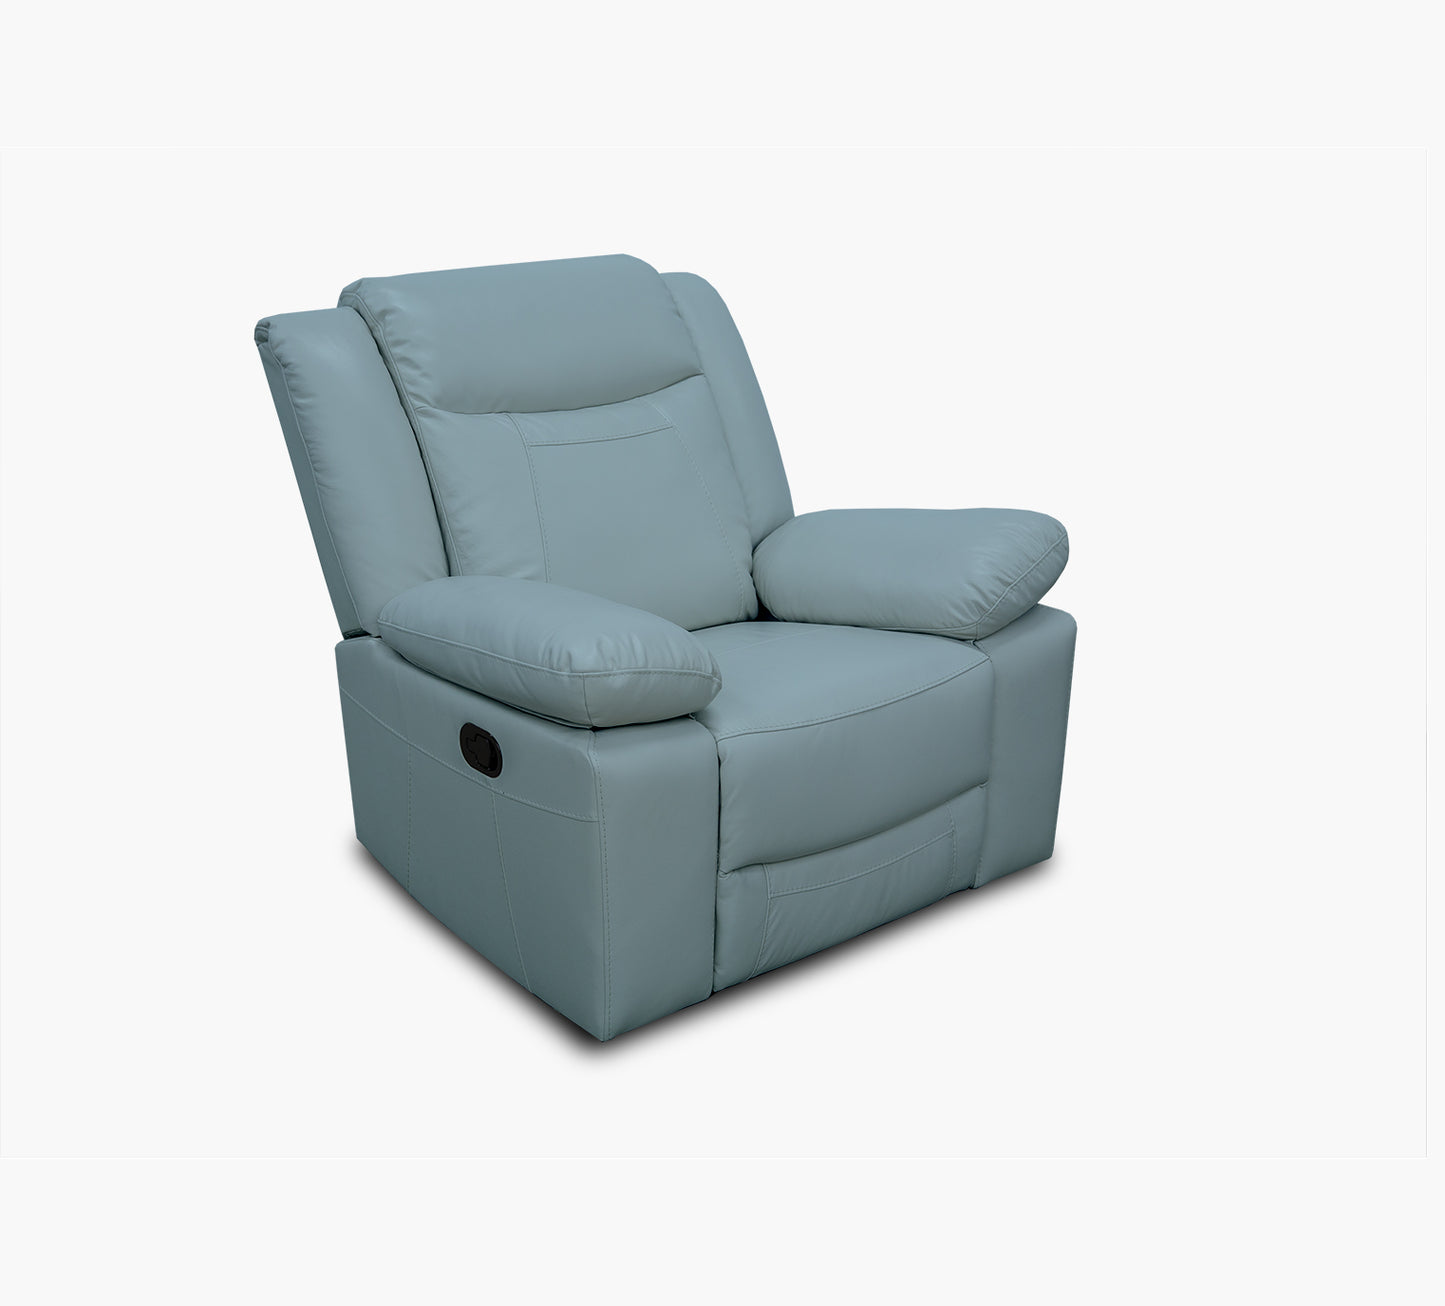 Dallas Teal Leather Glider Recliner